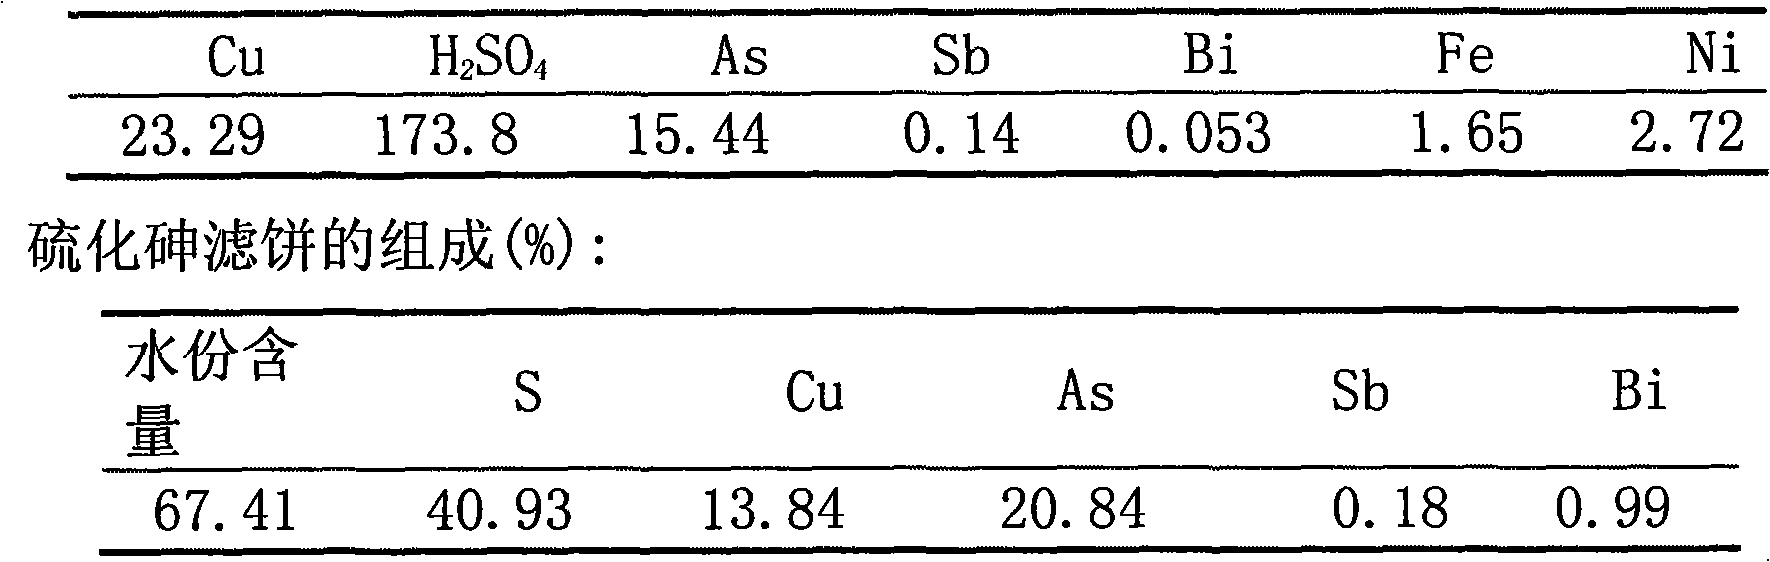 Method for recovering arsenic from scrap material containing arsenic and copper produced in process of copper smelting